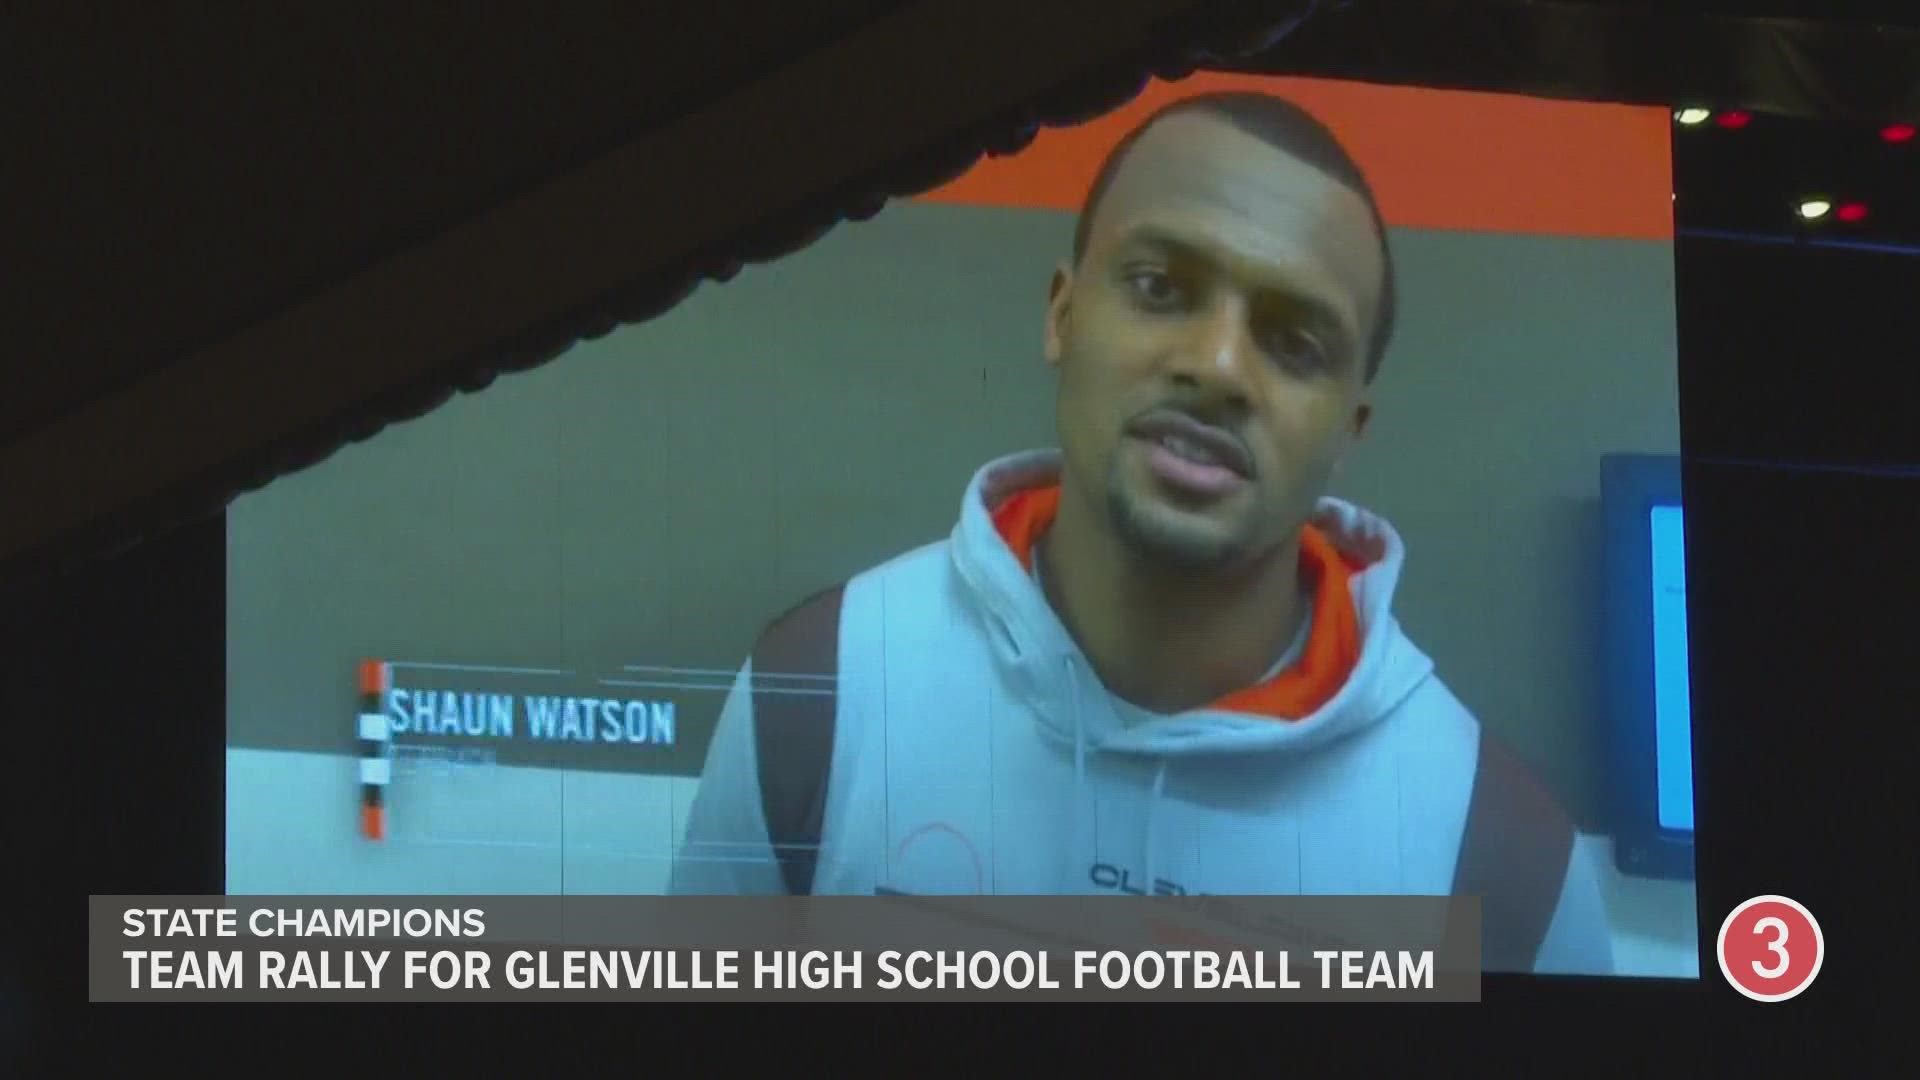 Members of the Cleveland Browns roster congratulated the Glenville High School football team on winning its first state championship.